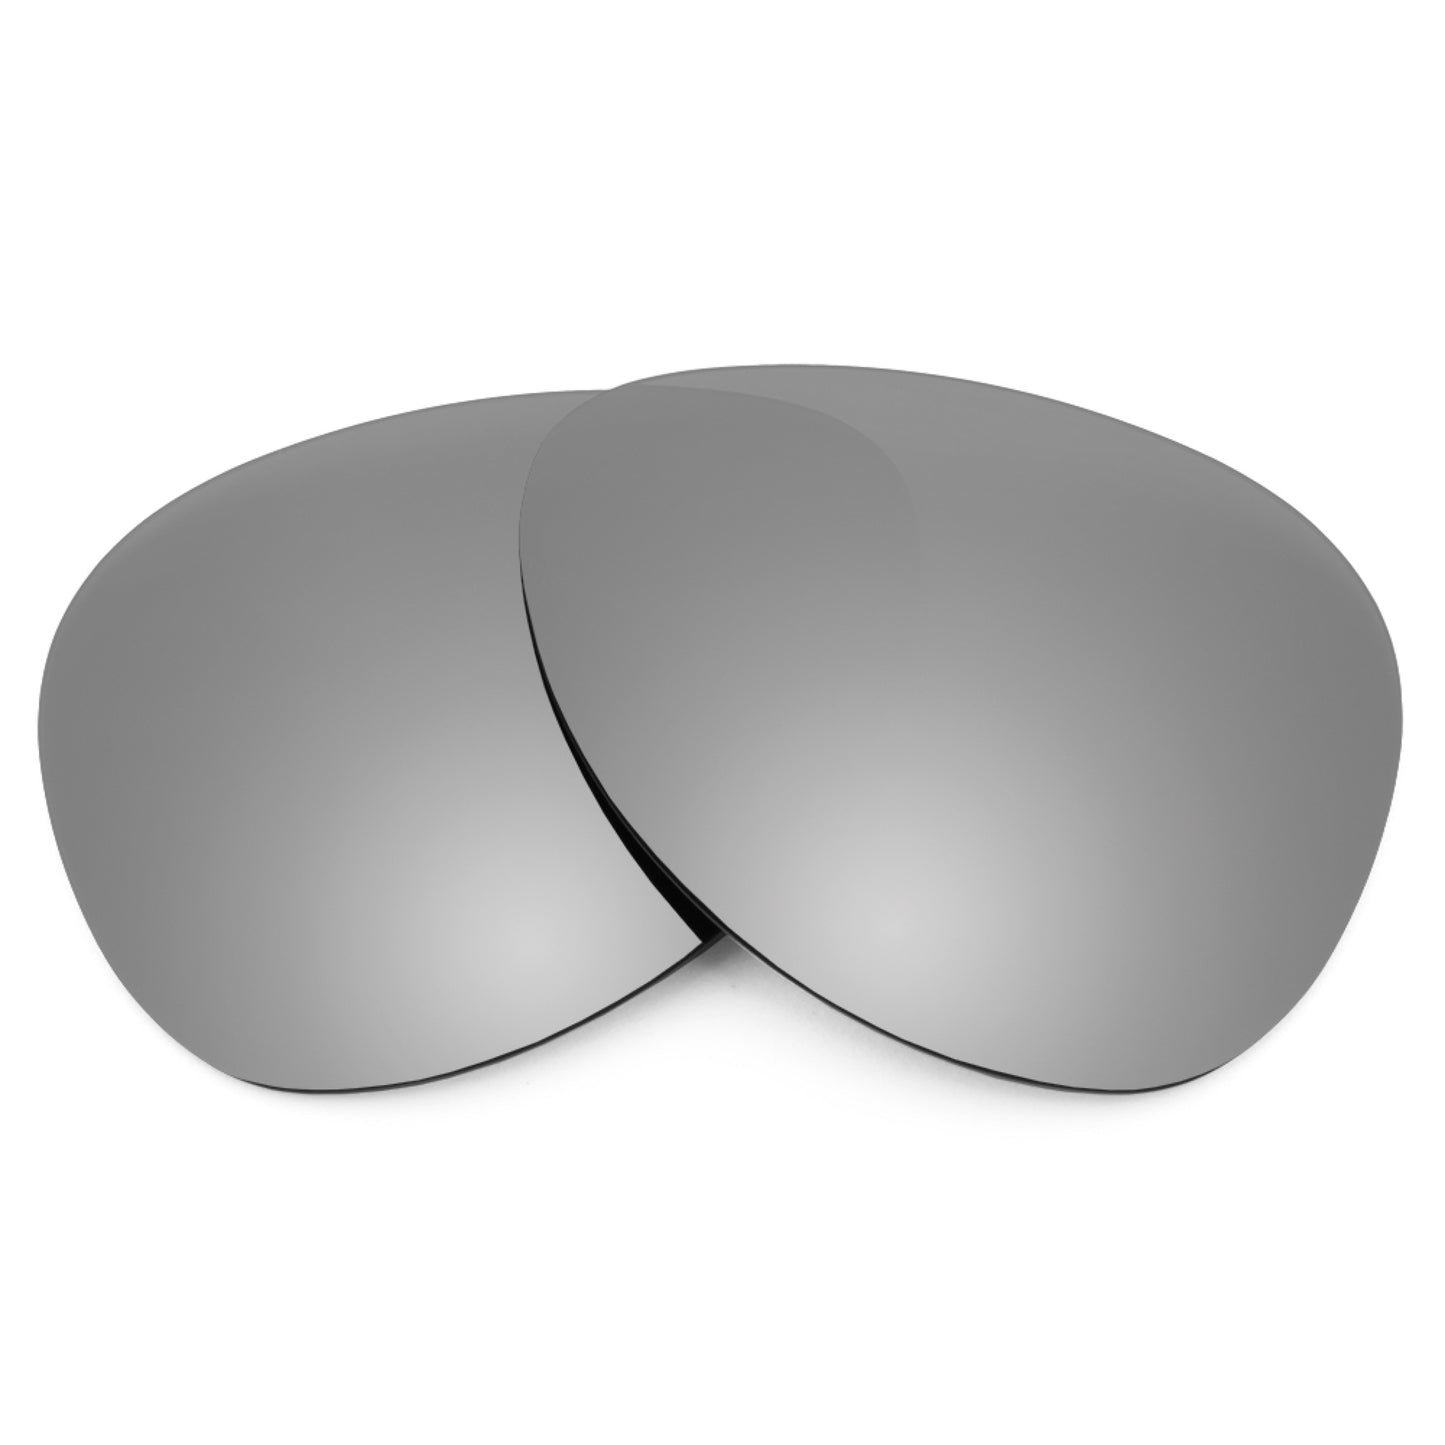 Revant replacement lenses for Ray-Ban Aviator RB3025 62mm Non-Polarized Titanium